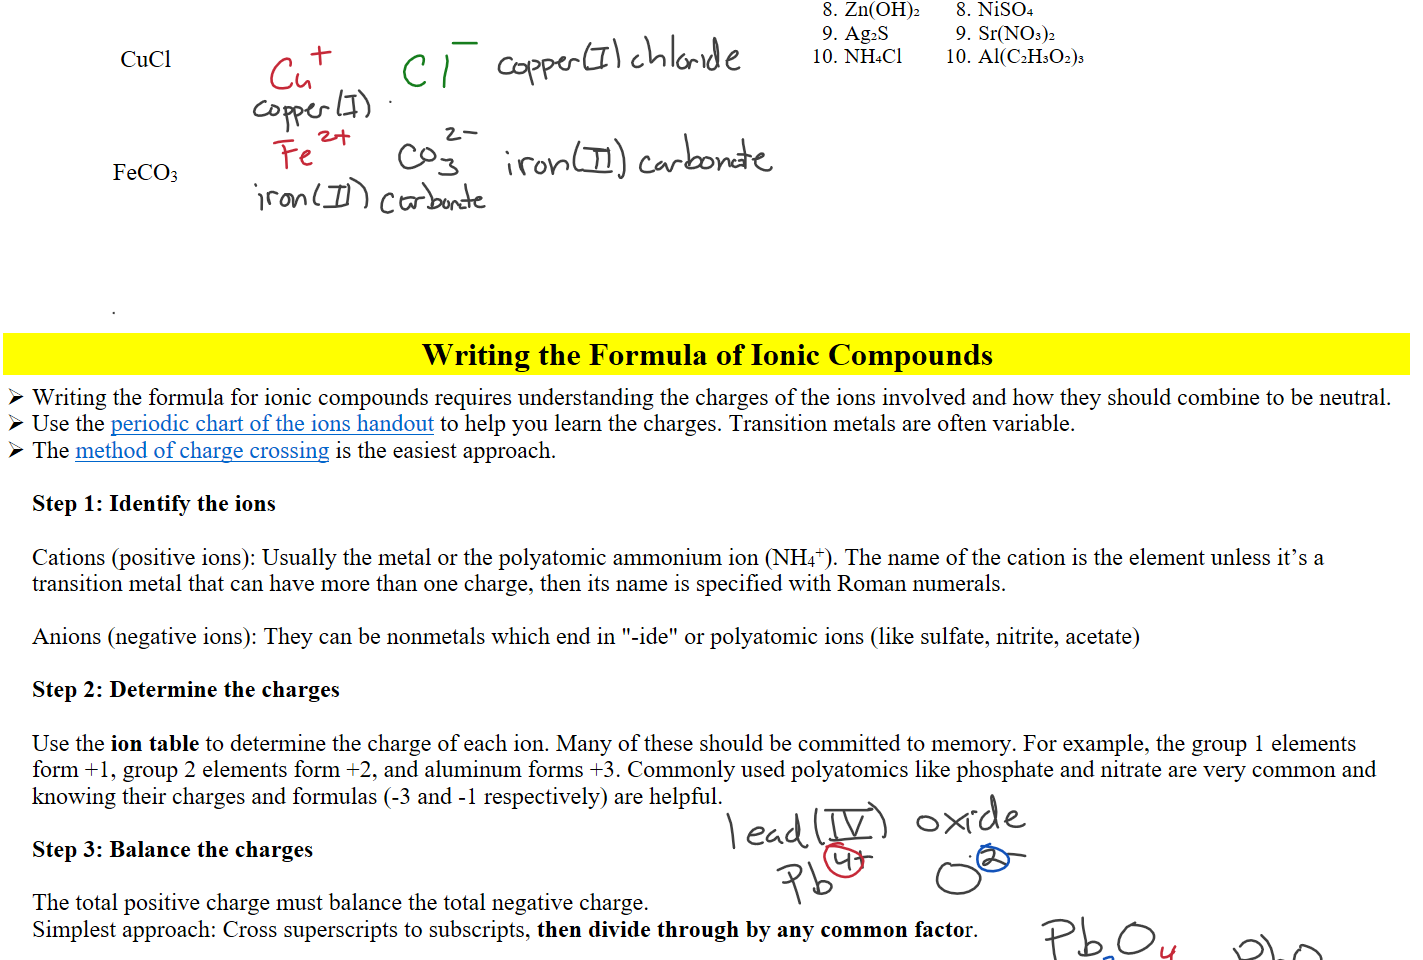 
 
CuCl





 
FeCO3





Zn(OH)₂
Ag₂S
NH₄Cl
NiSO₄
Sr(NO₃)₂
Al(C₂H₃O₂)₃



Writing the Formula of Ionic Compounds
Writing the formula for ionic compounds requires understanding the charges of the ions involved and how they should combine to be neutral.
Use the ﷟HYPERLINK "https://boisestatecanvas.instructure.com/courses/28698/modules/items/2973274"periodic chart of the ions handout to help you learn the charges. Transition metals are often variable.
The ﷟HYPERLINK "https://boisestatecanvas.instructure.com/courses/28698/modules/items/2973258"method of charge crossing is the easiest approach.

Step 1: Identify the ions

Cations (positive ions): Usually the metal or the polyatomic ammonium ion (NH4+). The name of the cation is the element unless it’s a transition metal that can have more than one charge, then its name is specified with Roman numerals.

Anions (negative ions): They can be nonmetals which end in "-ide" or polyatomic ions (like sulfate, nitrite, acetate)

Step 2: Determine the charges

Use the ion table to determine the charge of each ion. Many of these should be committed to memory. For example, the group 1 elements form +1, group 2 elements form +2, and aluminum forms +3. Commonly used polyatomics like phosphate and nitrate are very common and knowing their charges and formulas (-3 and -1 respectively) are helpful.

Step 3: Balance the charges

The total positive charge must balance the total negative charge. 
Simplest approach: Cross superscripts to subscripts, then divide through by any common factor.

Ink Drawings
Ink Drawings
Ink Drawings
Ink Drawings
Ink Drawings
Ink Drawings
Ink Drawings
Ink Drawings
Ink Drawings
Ink Drawings
Ink Drawings
Ink Drawings
Ink Drawings
Ink Drawings
Ink Drawings
Ink Drawings
Ink Drawings
Ink Drawings
Ink Drawings
Ink Drawings
Ink Drawings
Ink Drawings
Ink Drawings
Ink Drawings
Ink Drawings
Ink Drawings
Ink Drawings
Ink Drawings
Ink Drawings
Ink Drawings
Ink Drawings
Ink Drawings
Ink Drawings
Ink Drawings
Ink Drawings
Ink Drawings
Ink Drawings
Ink Drawings
Ink Drawings
Ink Drawings
Ink Drawings
Ink Drawings
Ink Drawings
Ink Drawings
Ink Drawings
Ink Drawings
Ink Drawings
Ink Drawings
Ink Drawings
Ink Drawings
Ink Drawings
Ink Drawings
Ink Drawings
Ink Drawings
Ink Drawings
Ink Drawings
Ink Drawings
Ink Drawings
Ink Drawings
Ink Drawings
Ink Drawings
Ink Drawings
Ink Drawings
Ink Drawings
Ink Drawings
Ink Drawings
Ink Drawings
Ink Drawings
Ink Drawings
Ink Drawings
Ink Drawings
Ink Drawings
Ink Drawings
Ink Drawings
Ink Drawings
Ink Drawings
Ink Drawings
Ink Drawings
Ink Drawings
Ink Drawings
Ink Drawings
Ink Drawings
Ink Drawings
Ink Drawings
Ink Drawings
Ink Drawings
Ink Drawings
Ink Drawings
Ink Drawings
Ink Drawings
Ink Drawings
Ink Drawings
Ink Drawings
Ink Drawings
Ink Drawings
Ink Drawings
Ink Drawings
Ink Drawings
Ink Drawings
Ink Drawings
Ink Drawings
Ink Drawings
Ink Drawings
Ink Drawings
Ink Drawings
Ink Drawings
Ink Drawings
Ink Drawings
Ink Drawings
Ink Drawings
Ink Drawings
Ink Drawings
Ink Drawings
Ink Drawings
Ink Drawings
Ink Drawings
Ink Drawings
Ink Drawings
Ink Drawings
Ink Drawings
Ink Drawings
Ink Drawings
Ink Drawings
Ink Drawings
Ink Drawings
Ink Drawings
Ink Drawings
Ink Drawings
Ink Drawings
Ink Drawings
Ink Drawings
Ink Drawings
Ink Drawings
Ink Drawings
Ink Drawings
Ink Drawings
Ink Drawings
Ink Drawings
